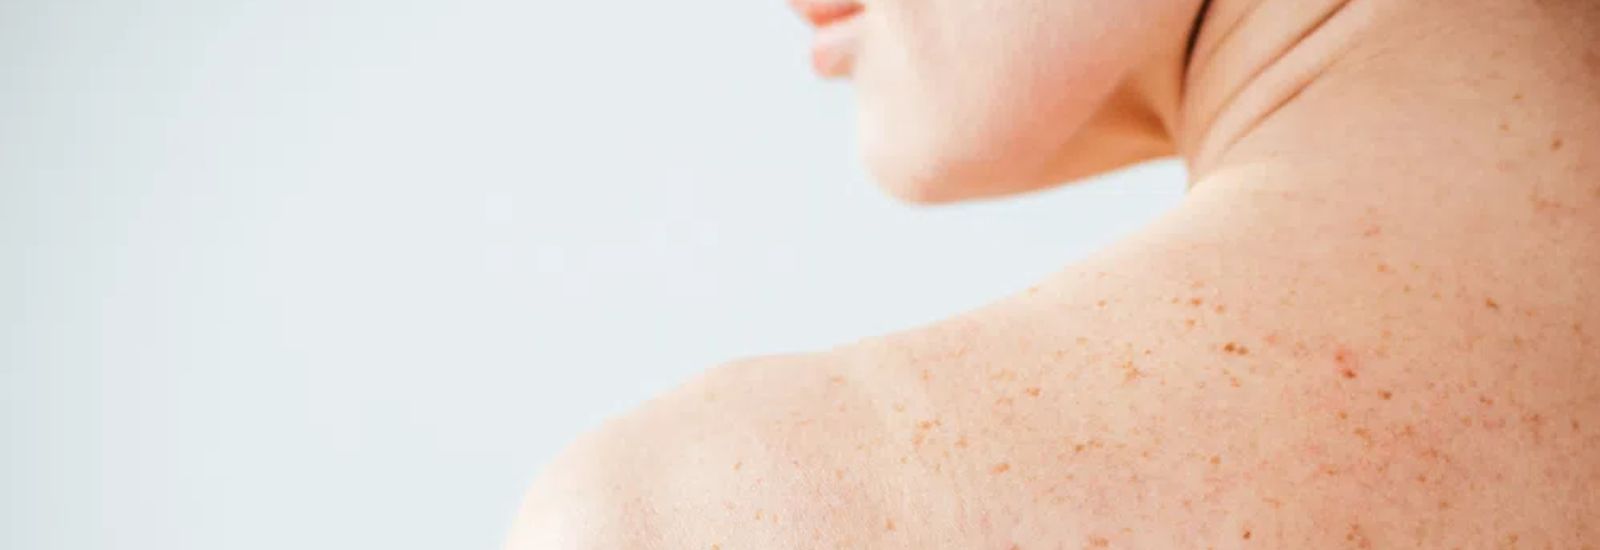 Are Moles Cancerous? What Percentage Should You Worry About?